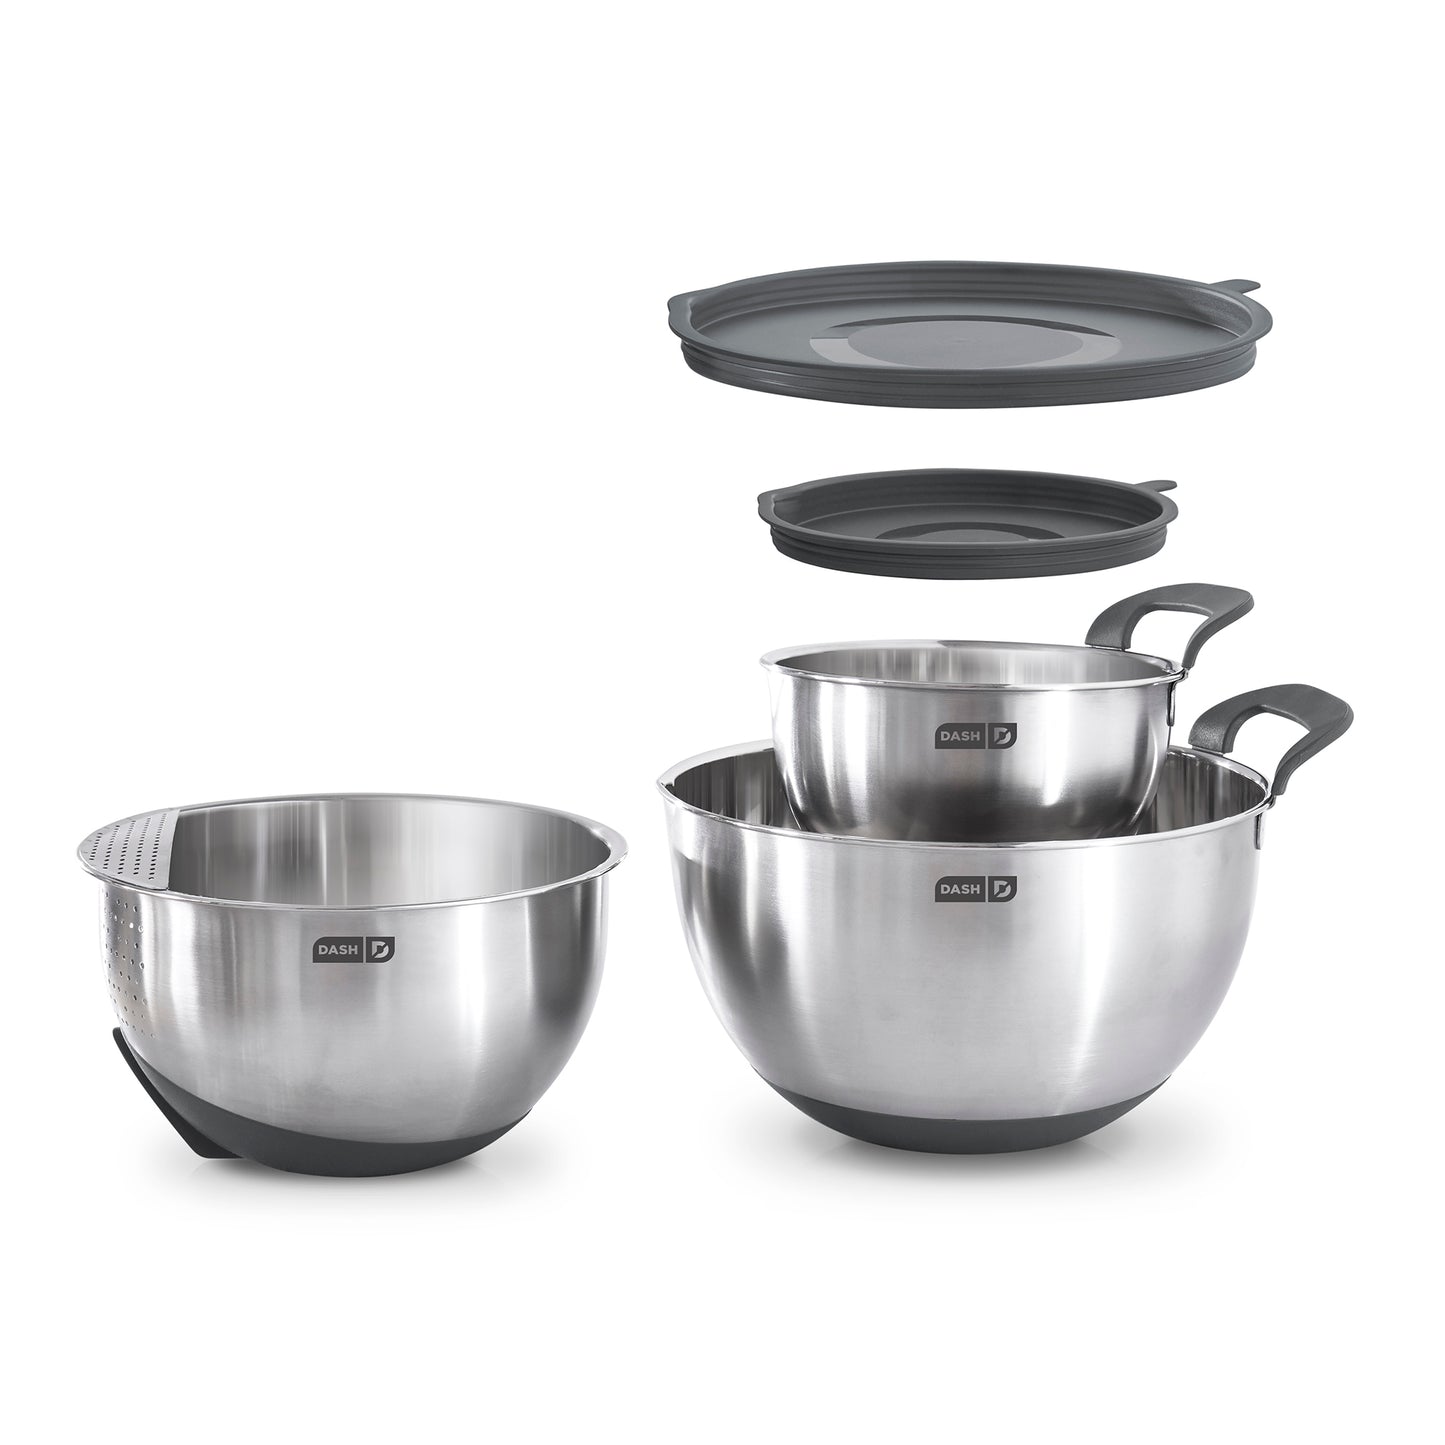 Stainless Steel Stand Mixer Tools - 3-Piece Set